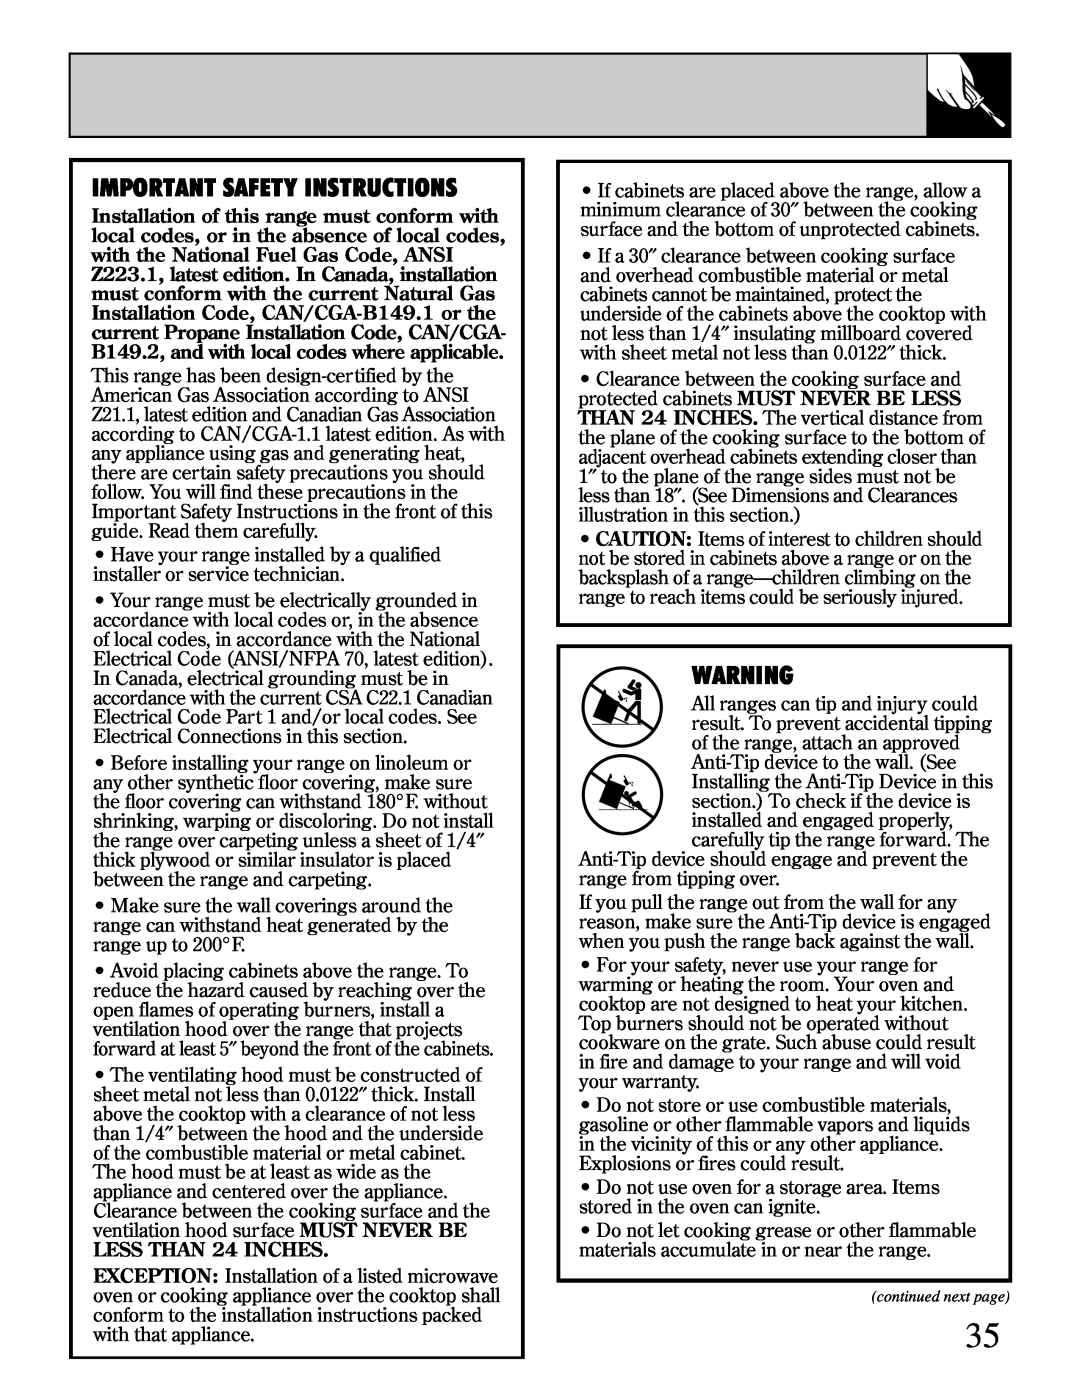 Hotpoint RGB744 installation instructions Important Safety Instructions, LESS THAN 24 INCHES 